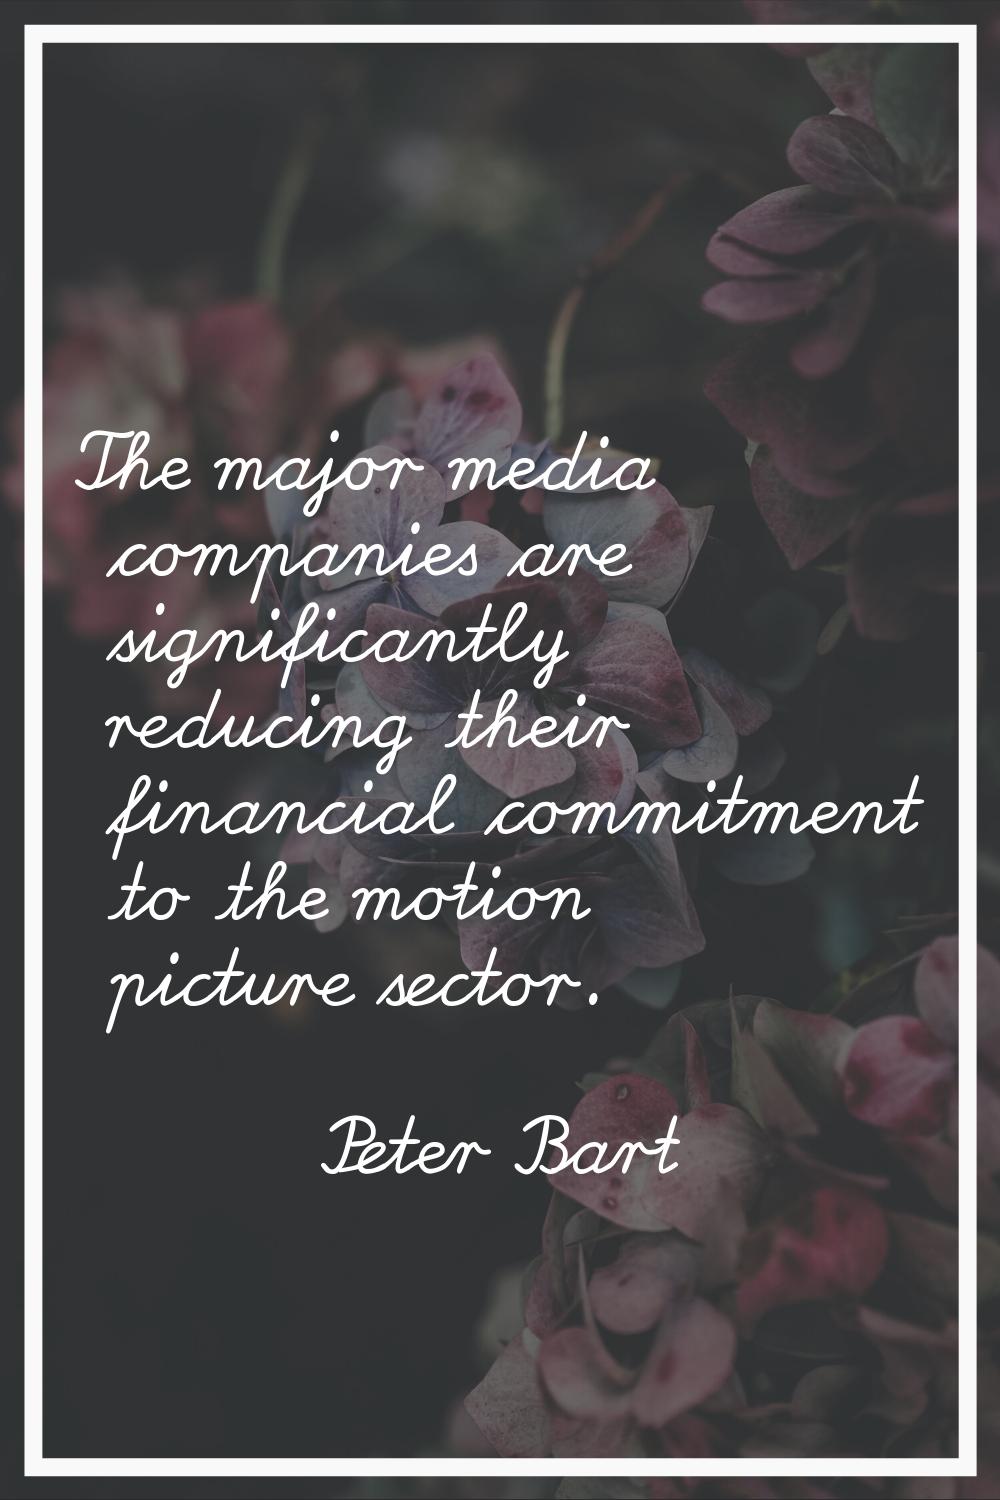 The major media companies are significantly reducing their financial commitment to the motion pictu